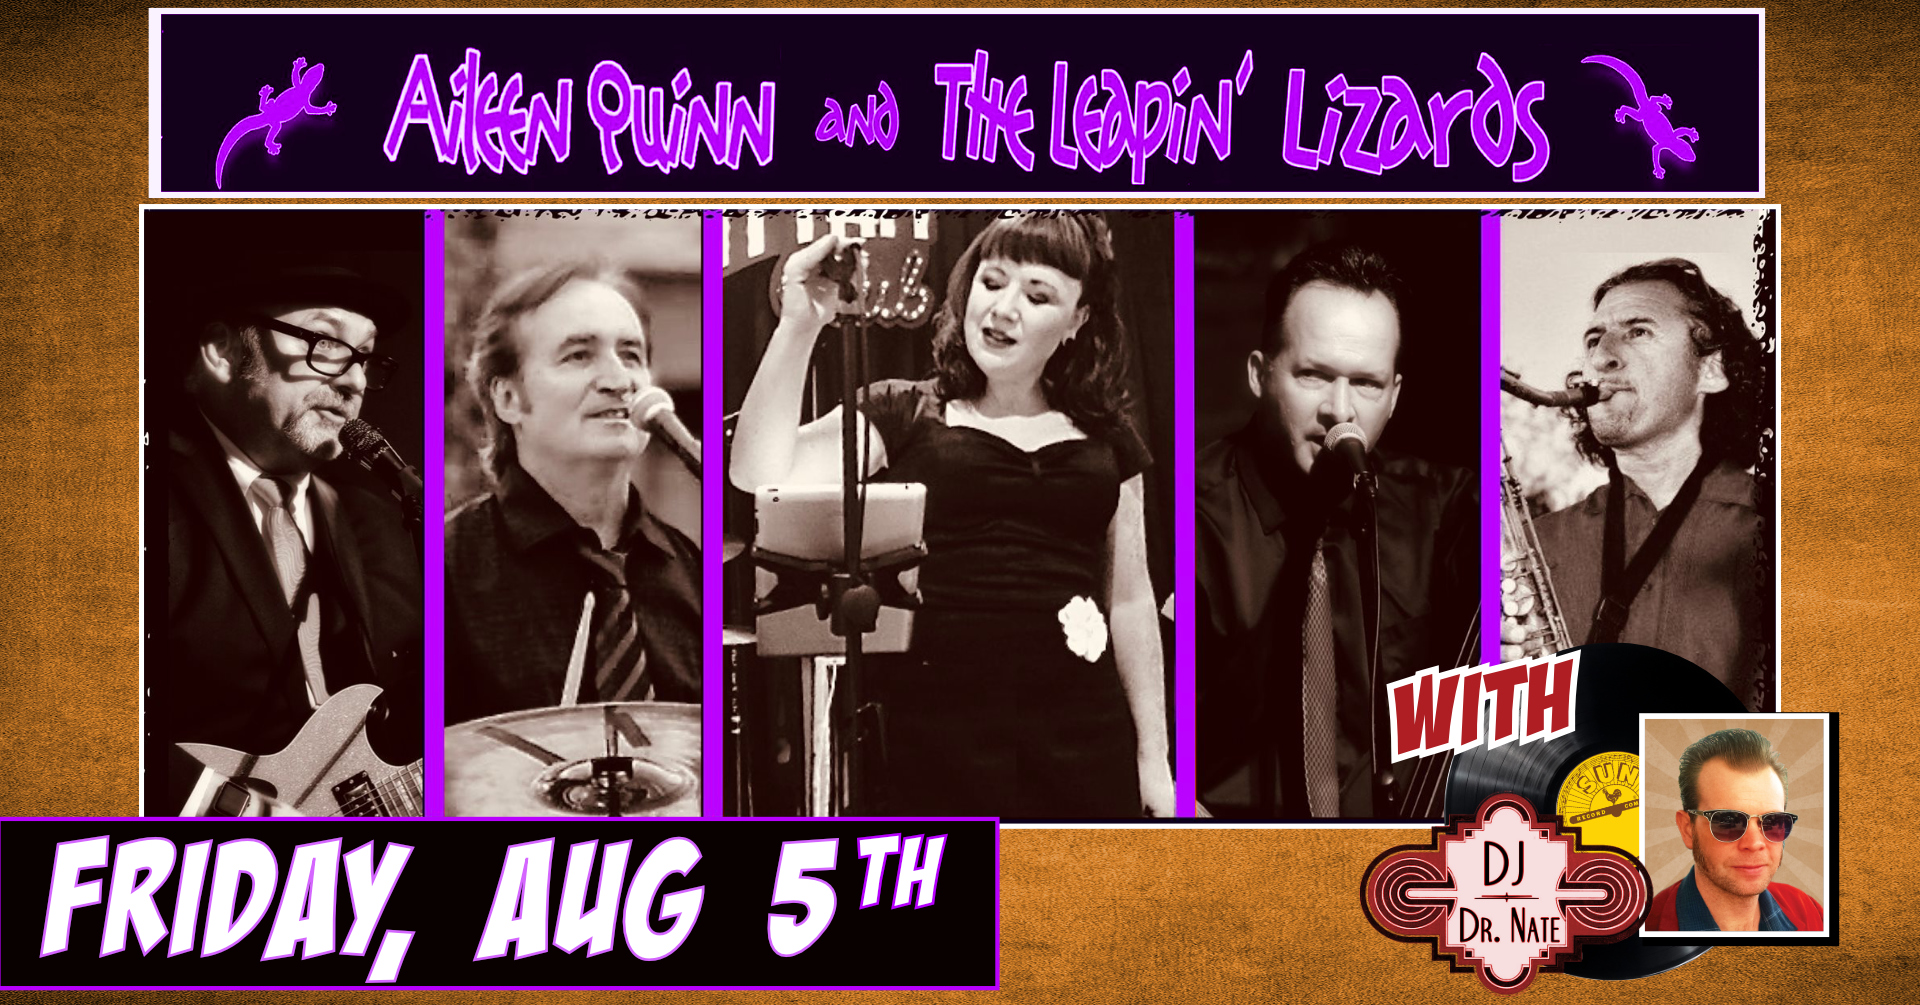 AILEEN QUINN & THE LEAPIN’ LIZARDS w/DJ DR. NATE at The Burbank Moose Lodge!